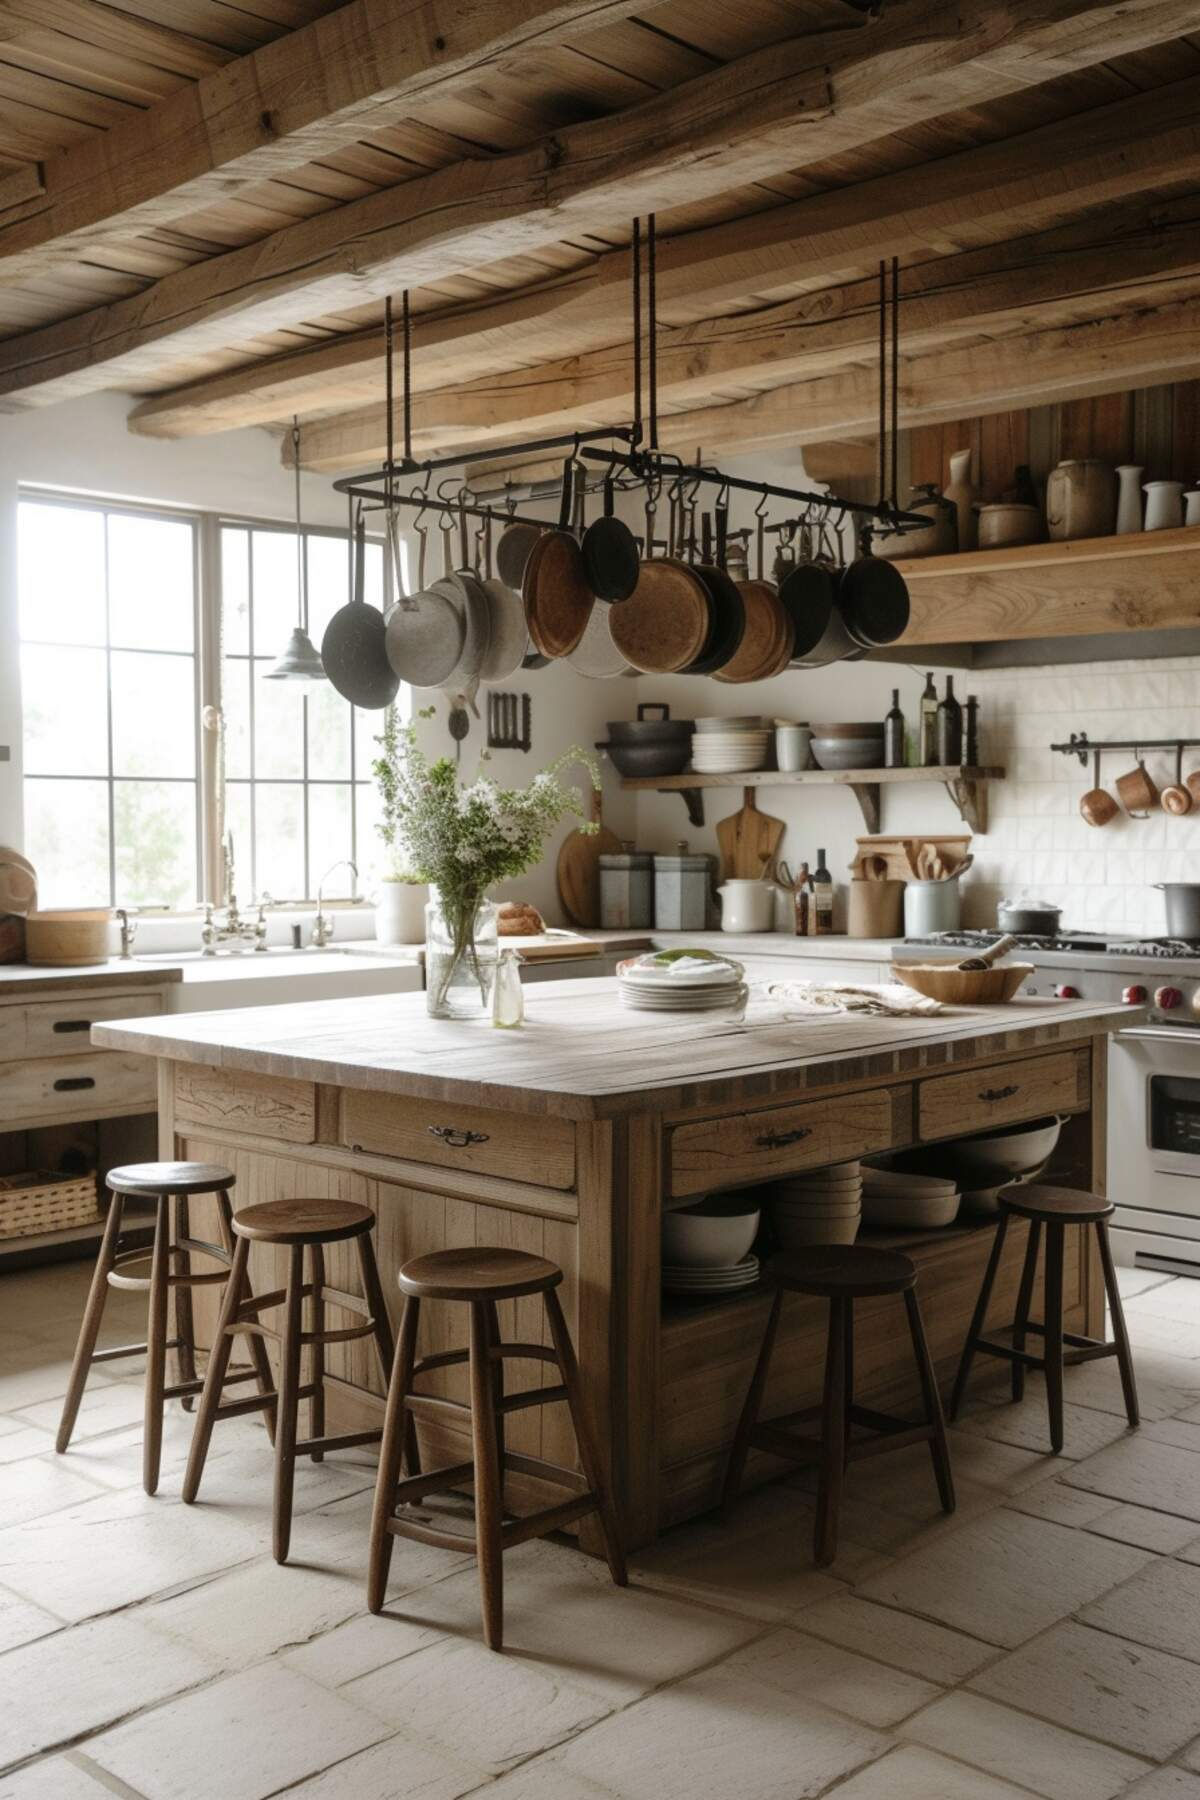 Charming Rustic Farmhouse Kitchen Ideas to Add Cozy Country Charm